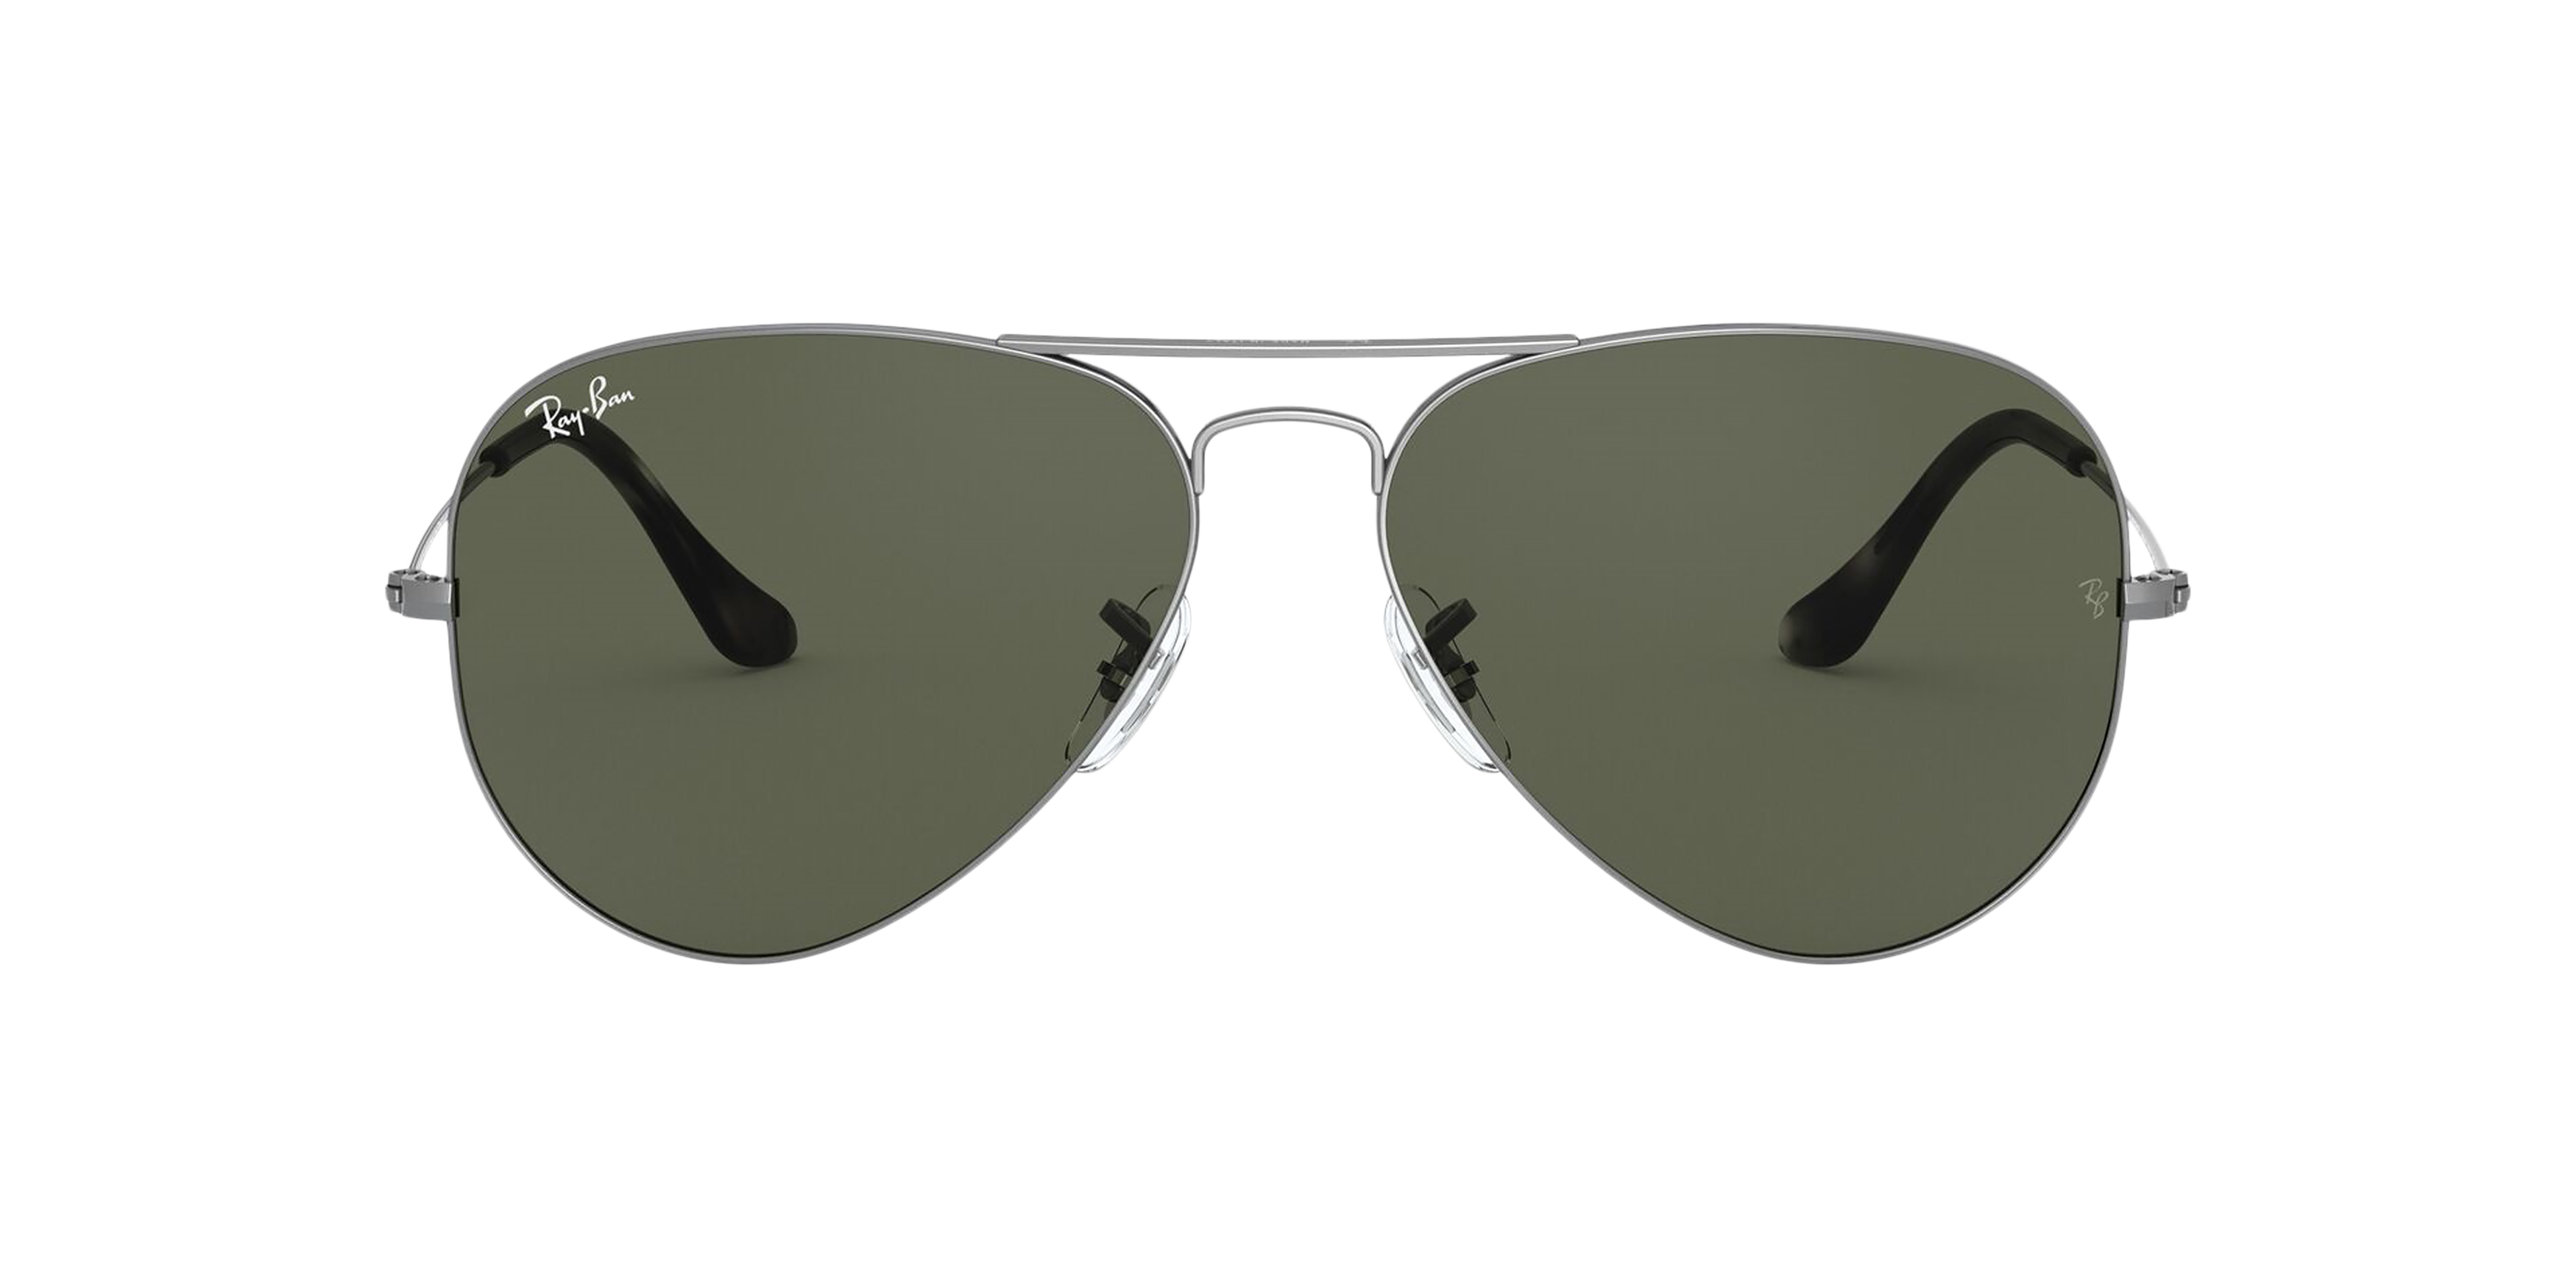 [products.image.front] Ray-Ban Aviator Classic RB3025 919031